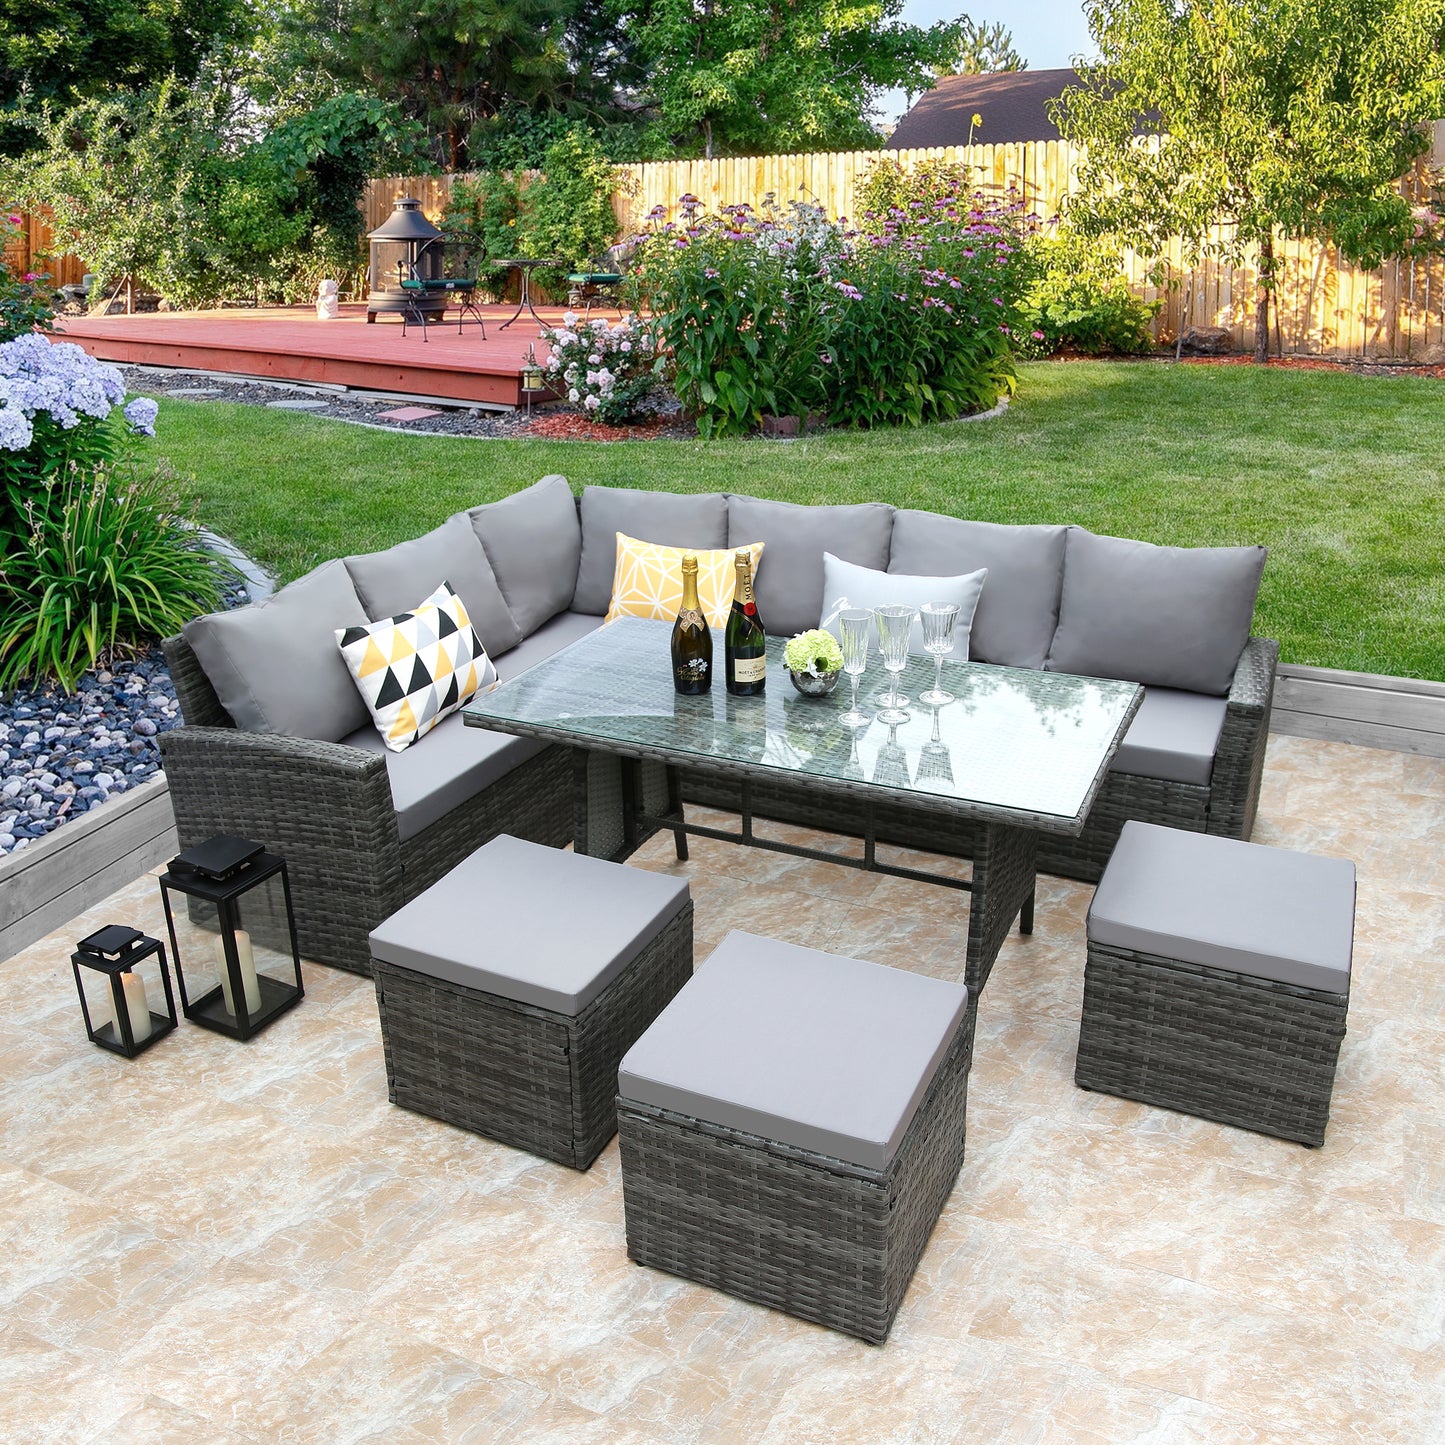 The Stow 6 / 7 Seater Rattan Garden Furniture Set With Grey Cushions